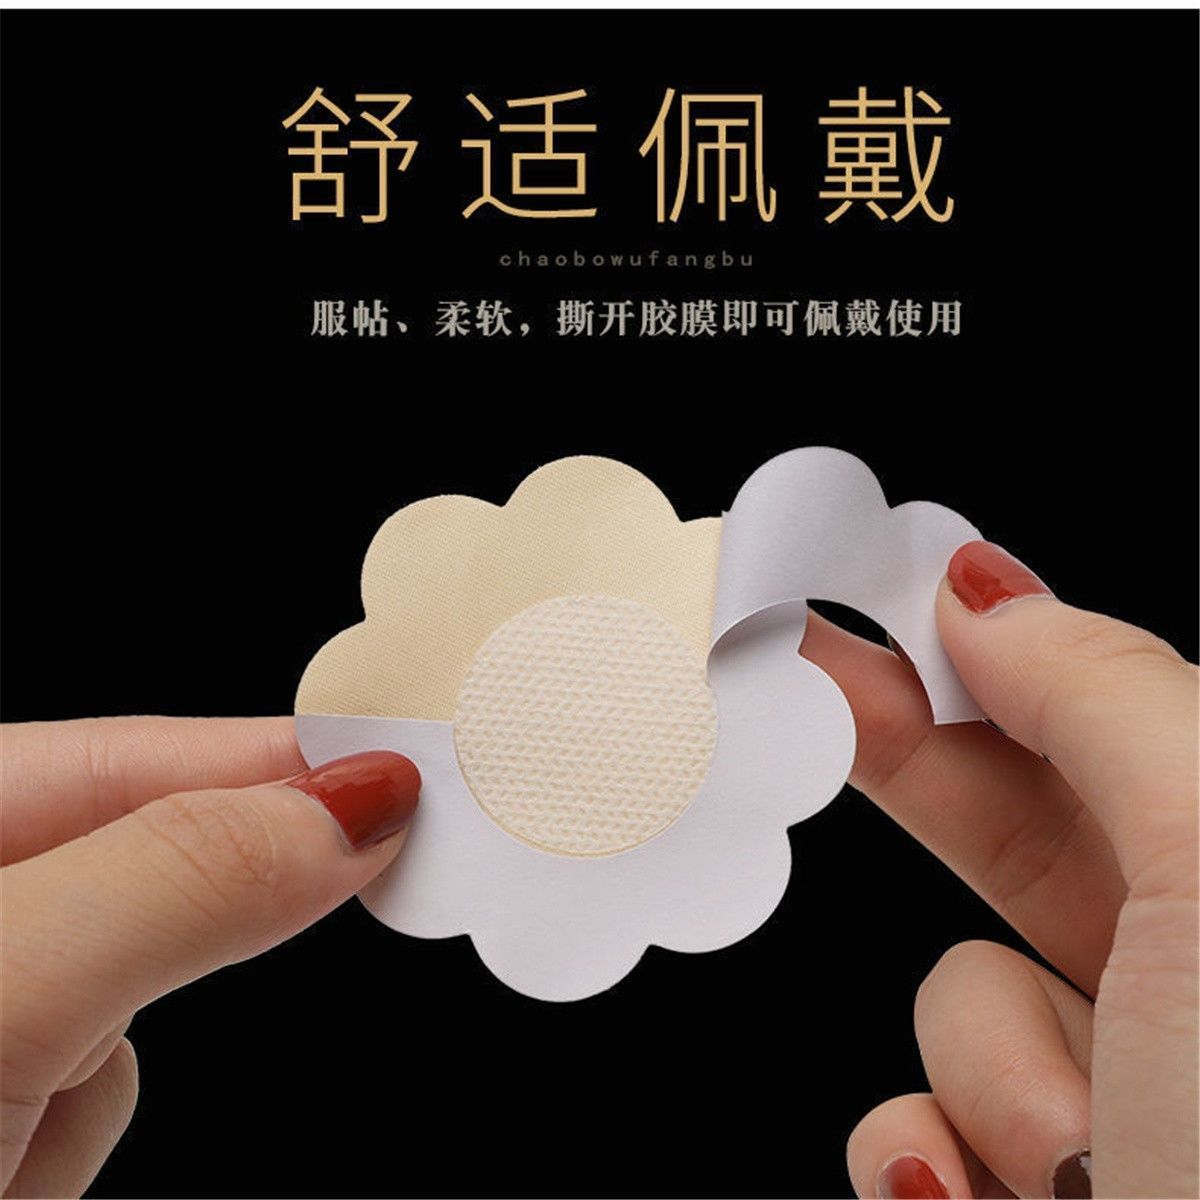 Disposable breast paste non-woven anti-convex thin section invisible chest sticker suspender skirt summer breathable small chest flat chest special